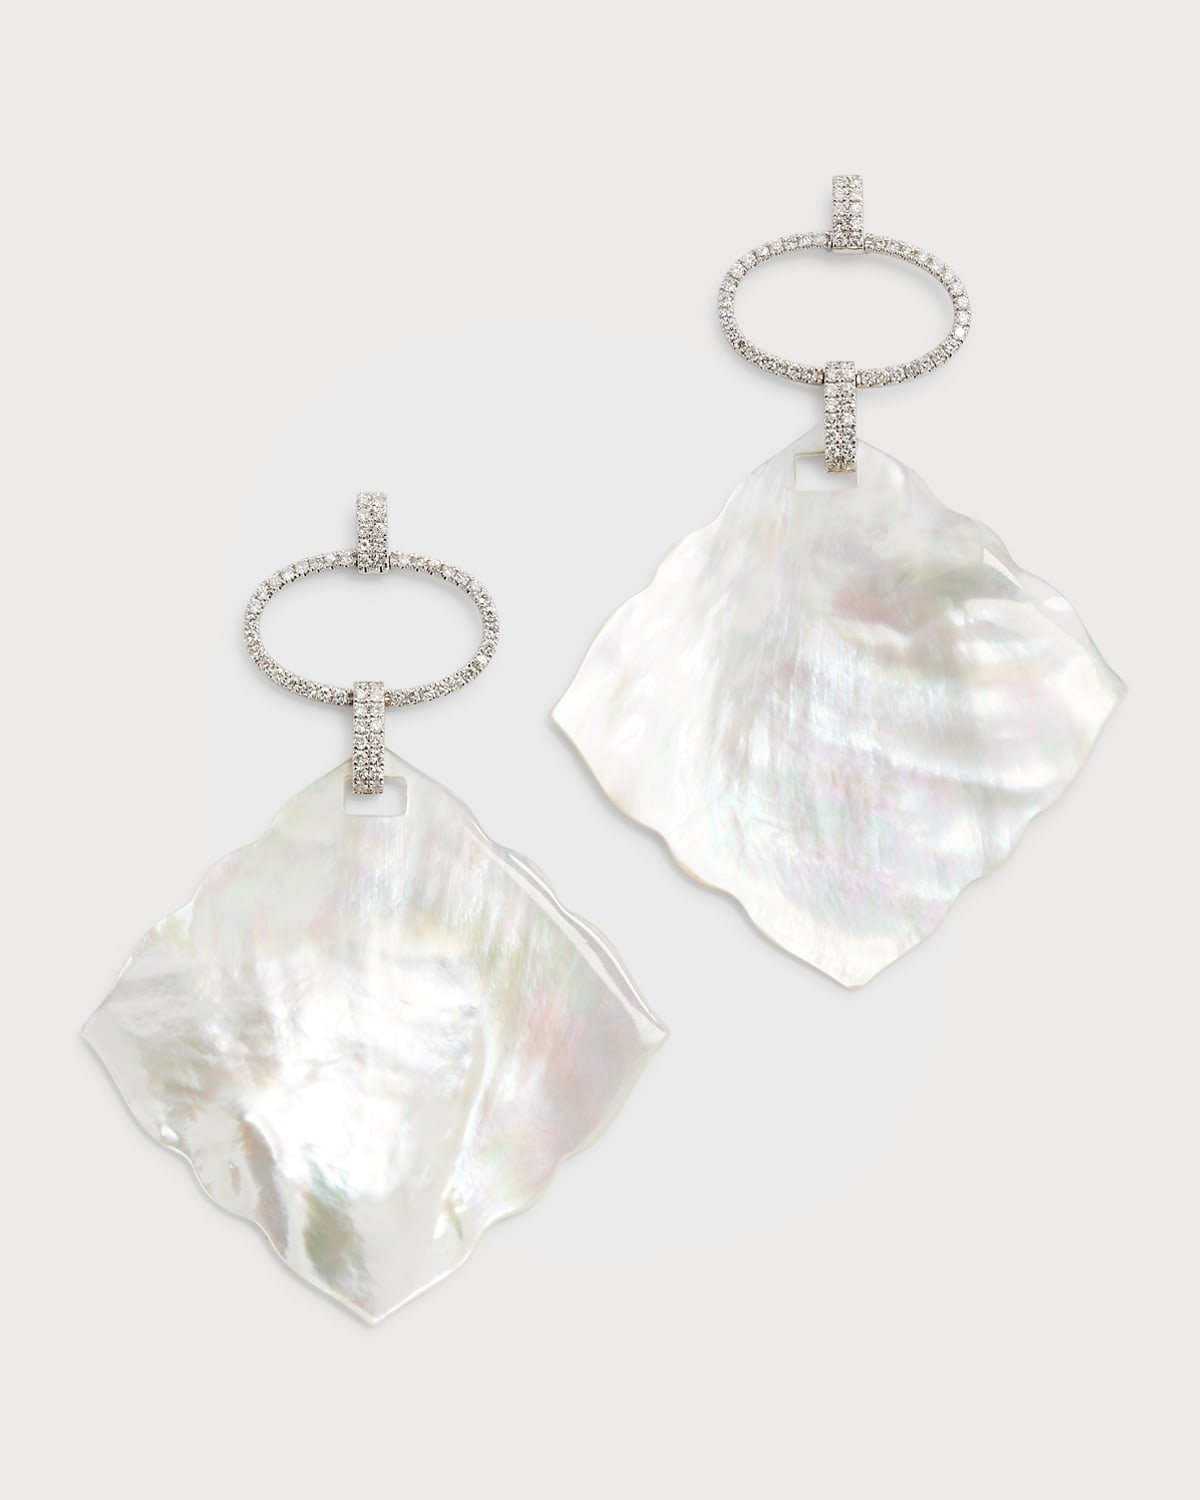 Piranesi 18K White Gold Mother-of-Pearl and Diamond Drop Earrings